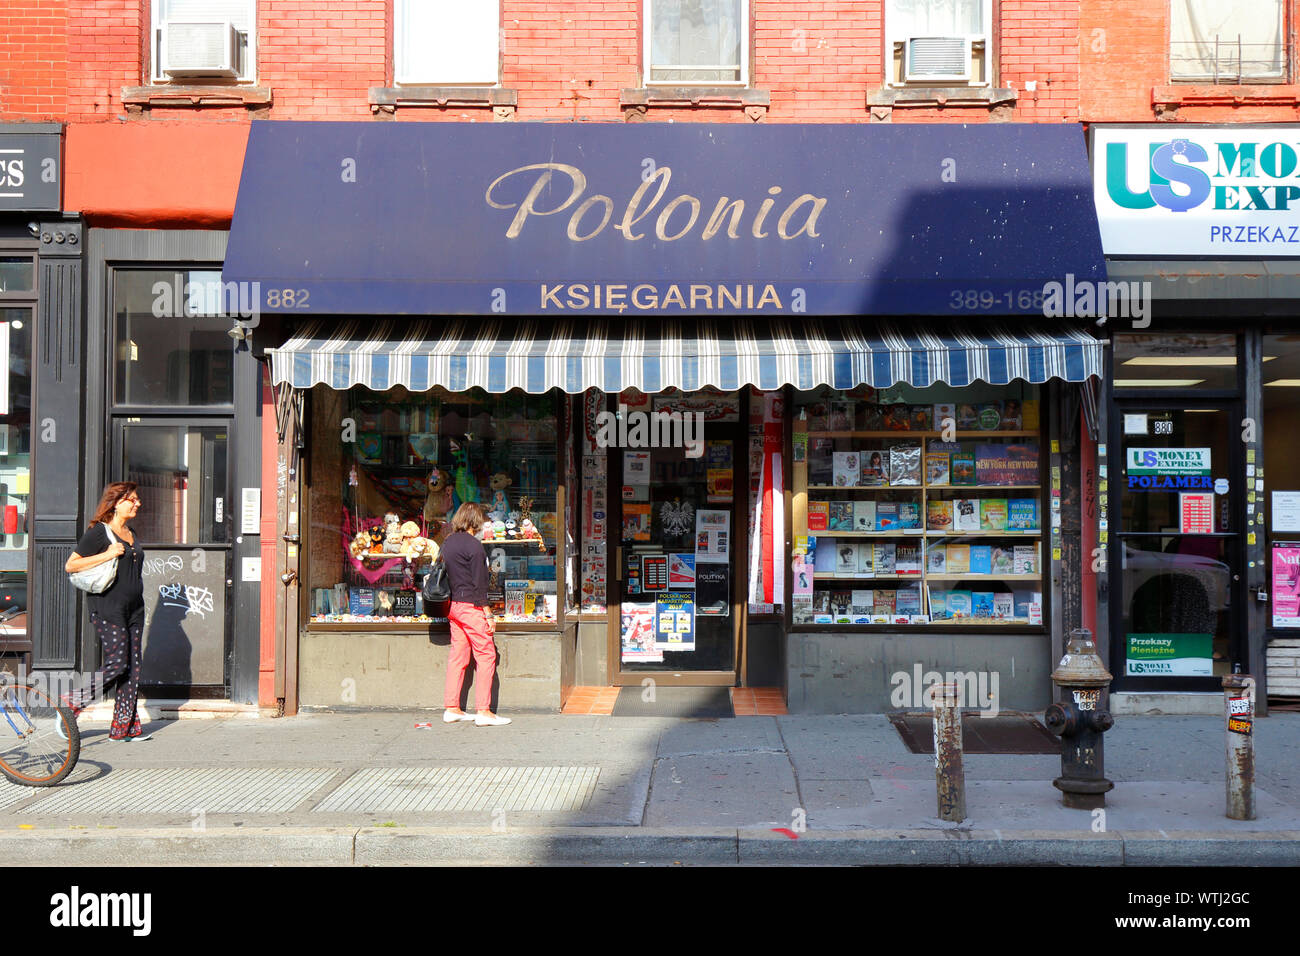 Polonia Book Store, 882 Manhattan Avenue, Brooklyn, NY. exterior storefront of a polish bookstore in Greenpoint. Stock Photo